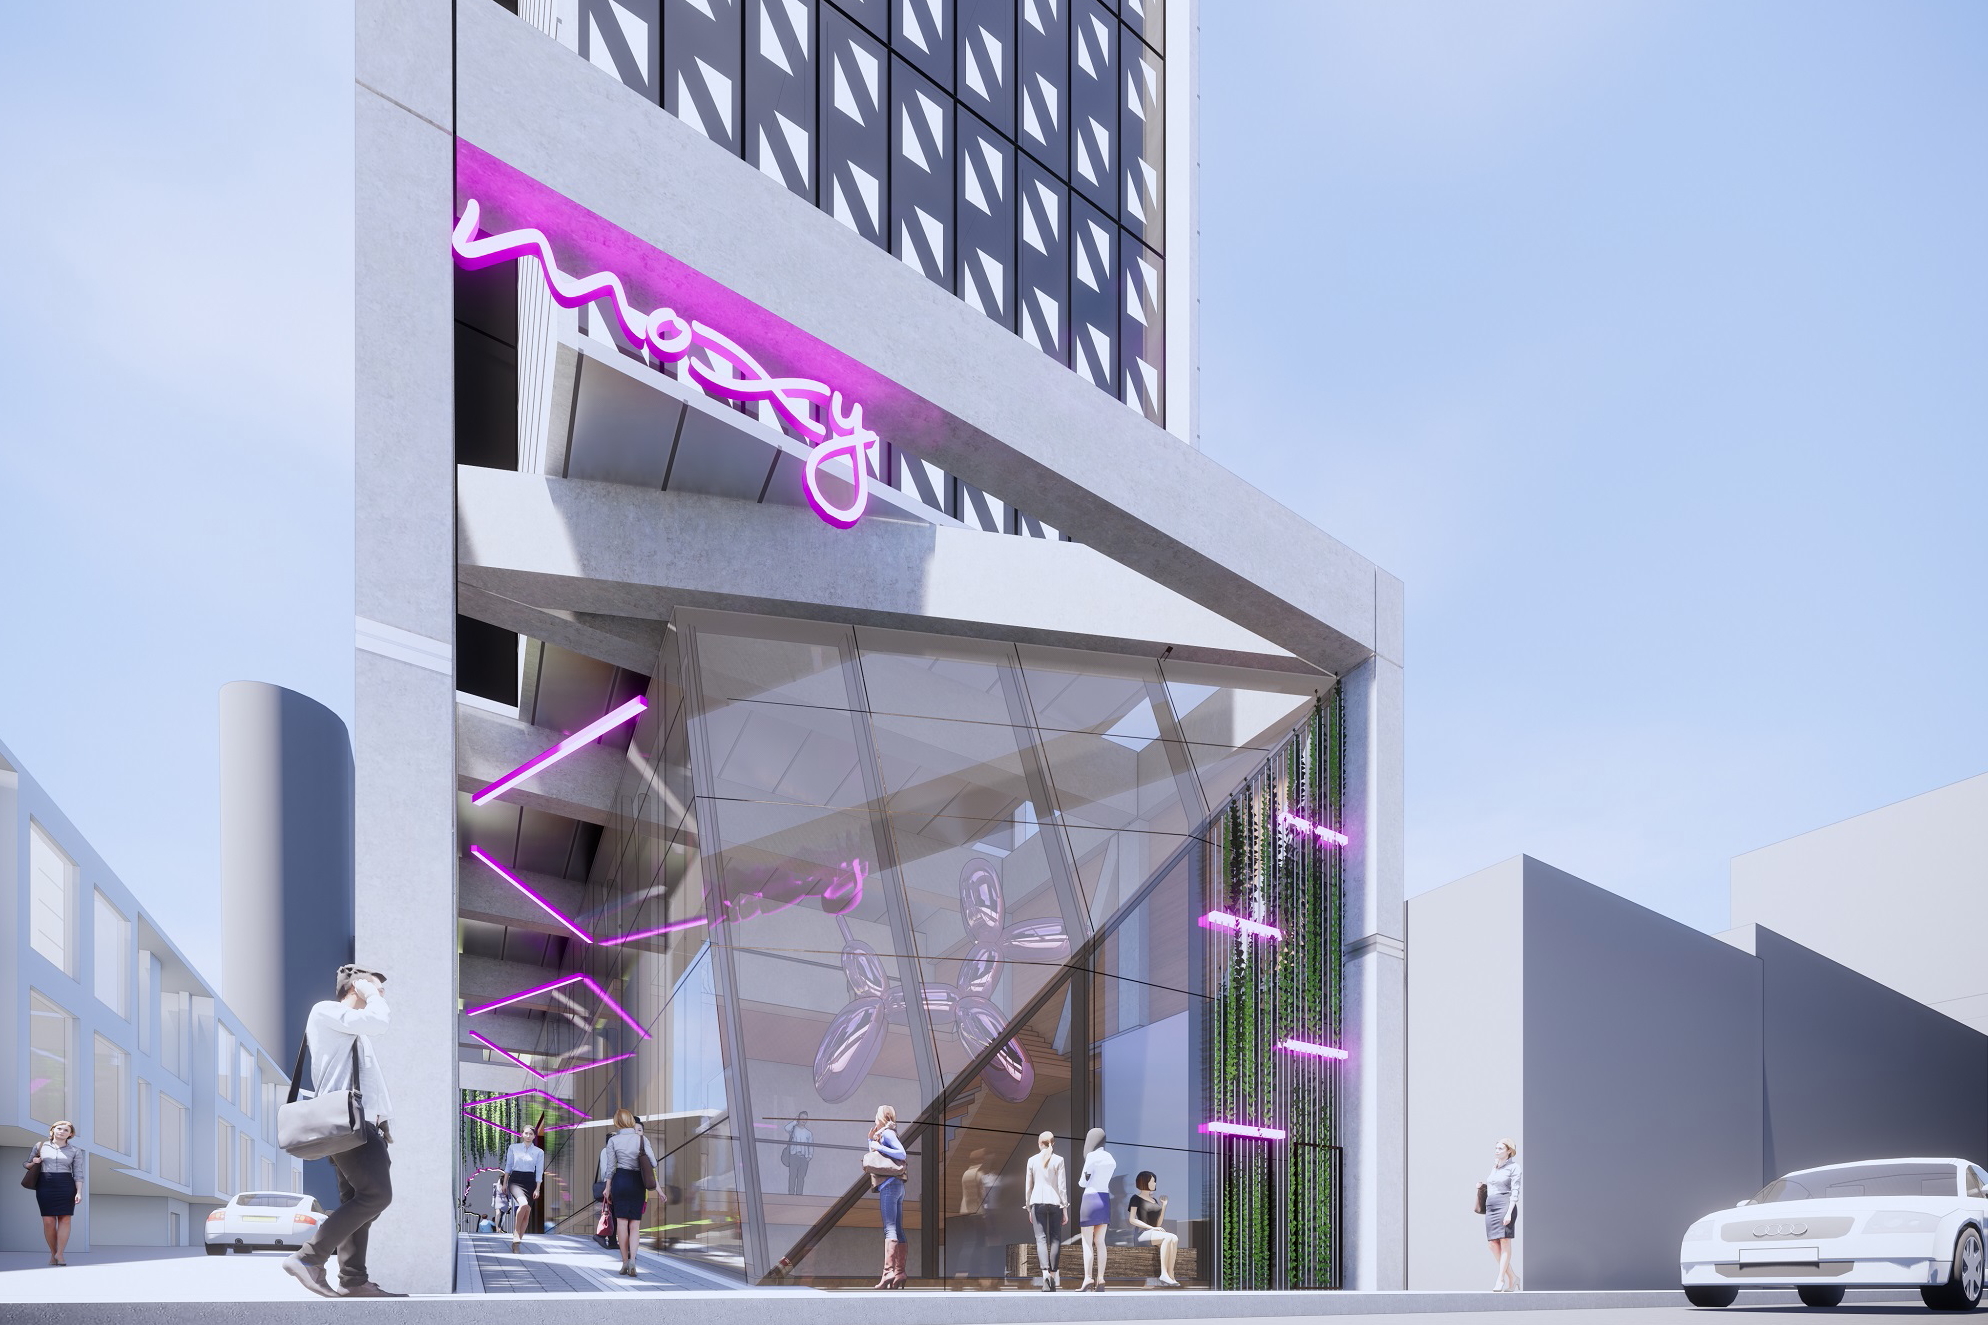 Marriott has signed the first Moxy Hotel in Australia. Scheduled to open in July 2021, the 180-room, new-build Moxy Melbourne South Yarra hotel is being developed by Melbourne businessmen Hector Ktori and Peter Arvanitis, and designed by architectural firm Rothelowman. Click to enlarge.